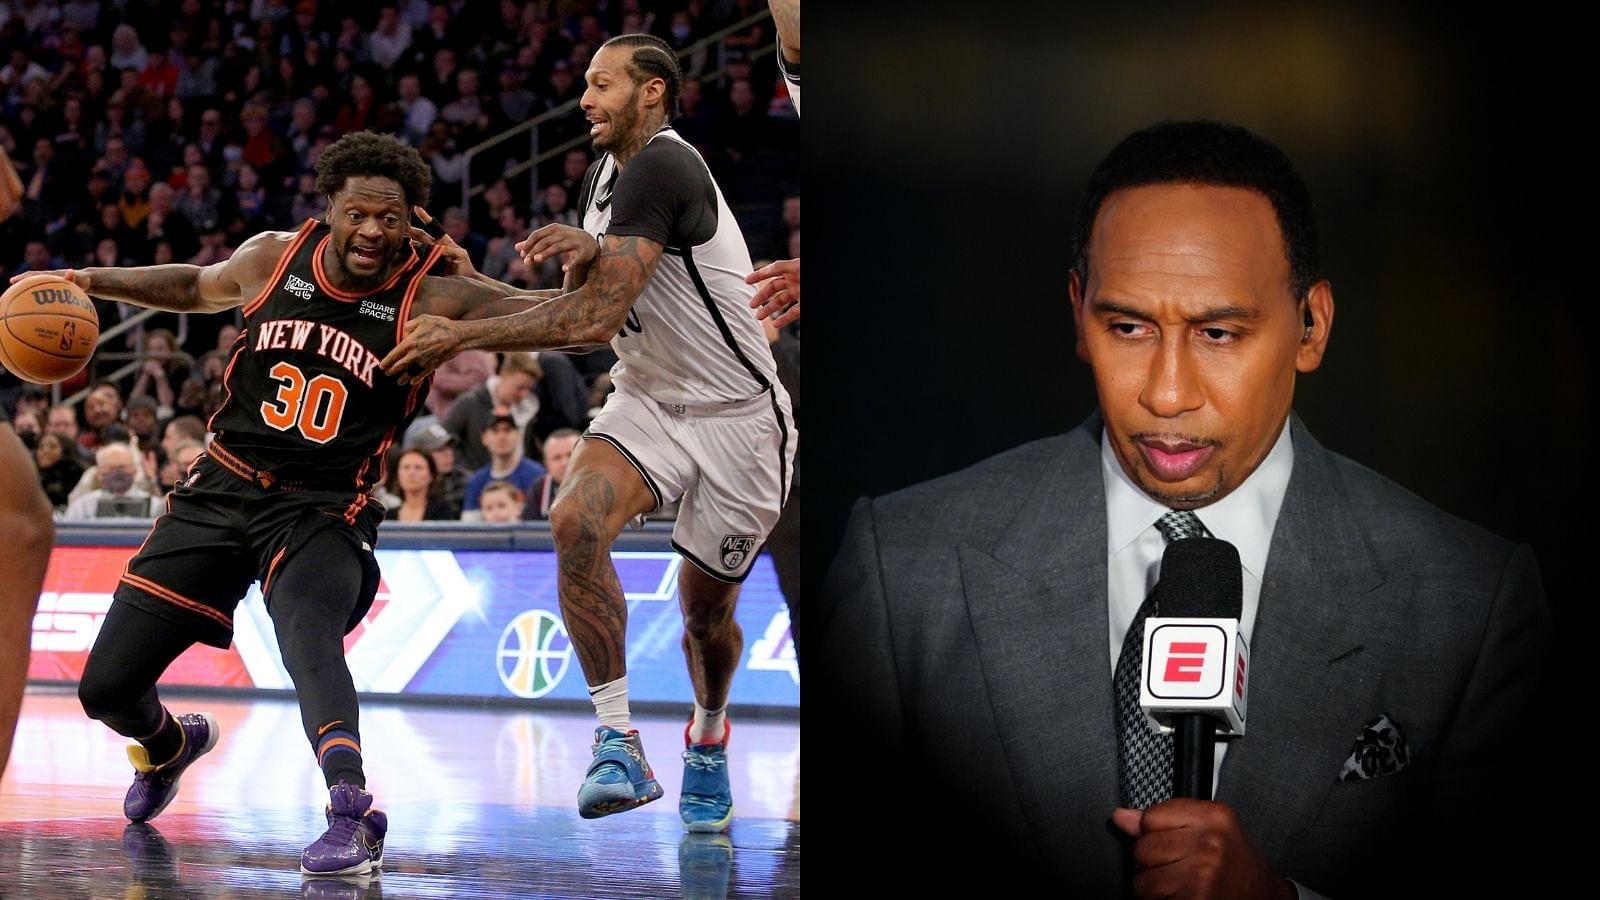 "The New York Knicks are a national disgrace": Stephen A. Smith destroys Julius Randle and Co as they concede their worst loss of the season against the Nets with no superstar